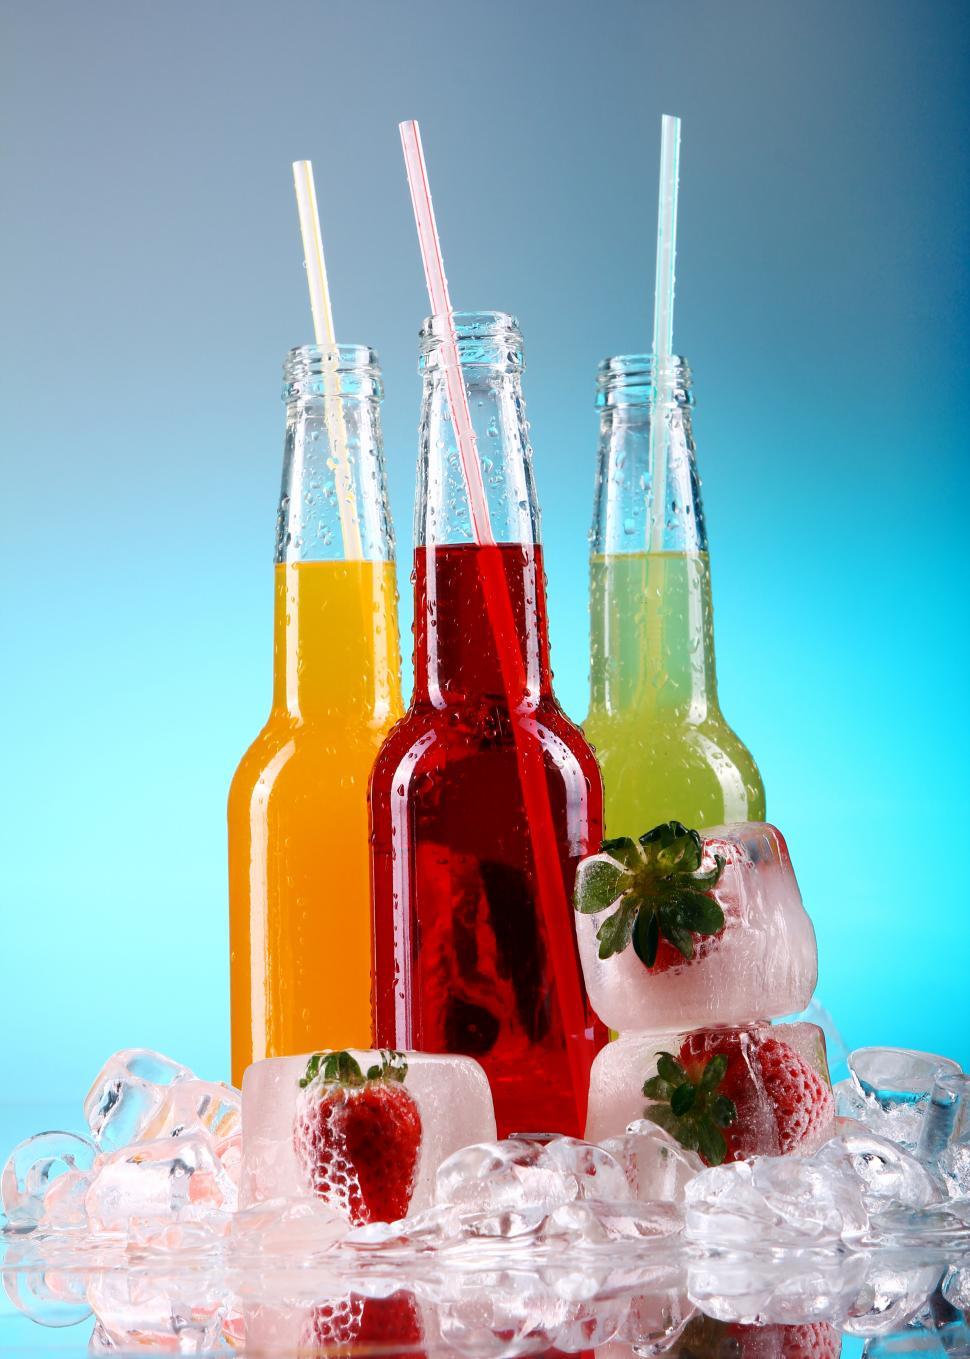 Free Image of Colorful drinks with straws over blue background 